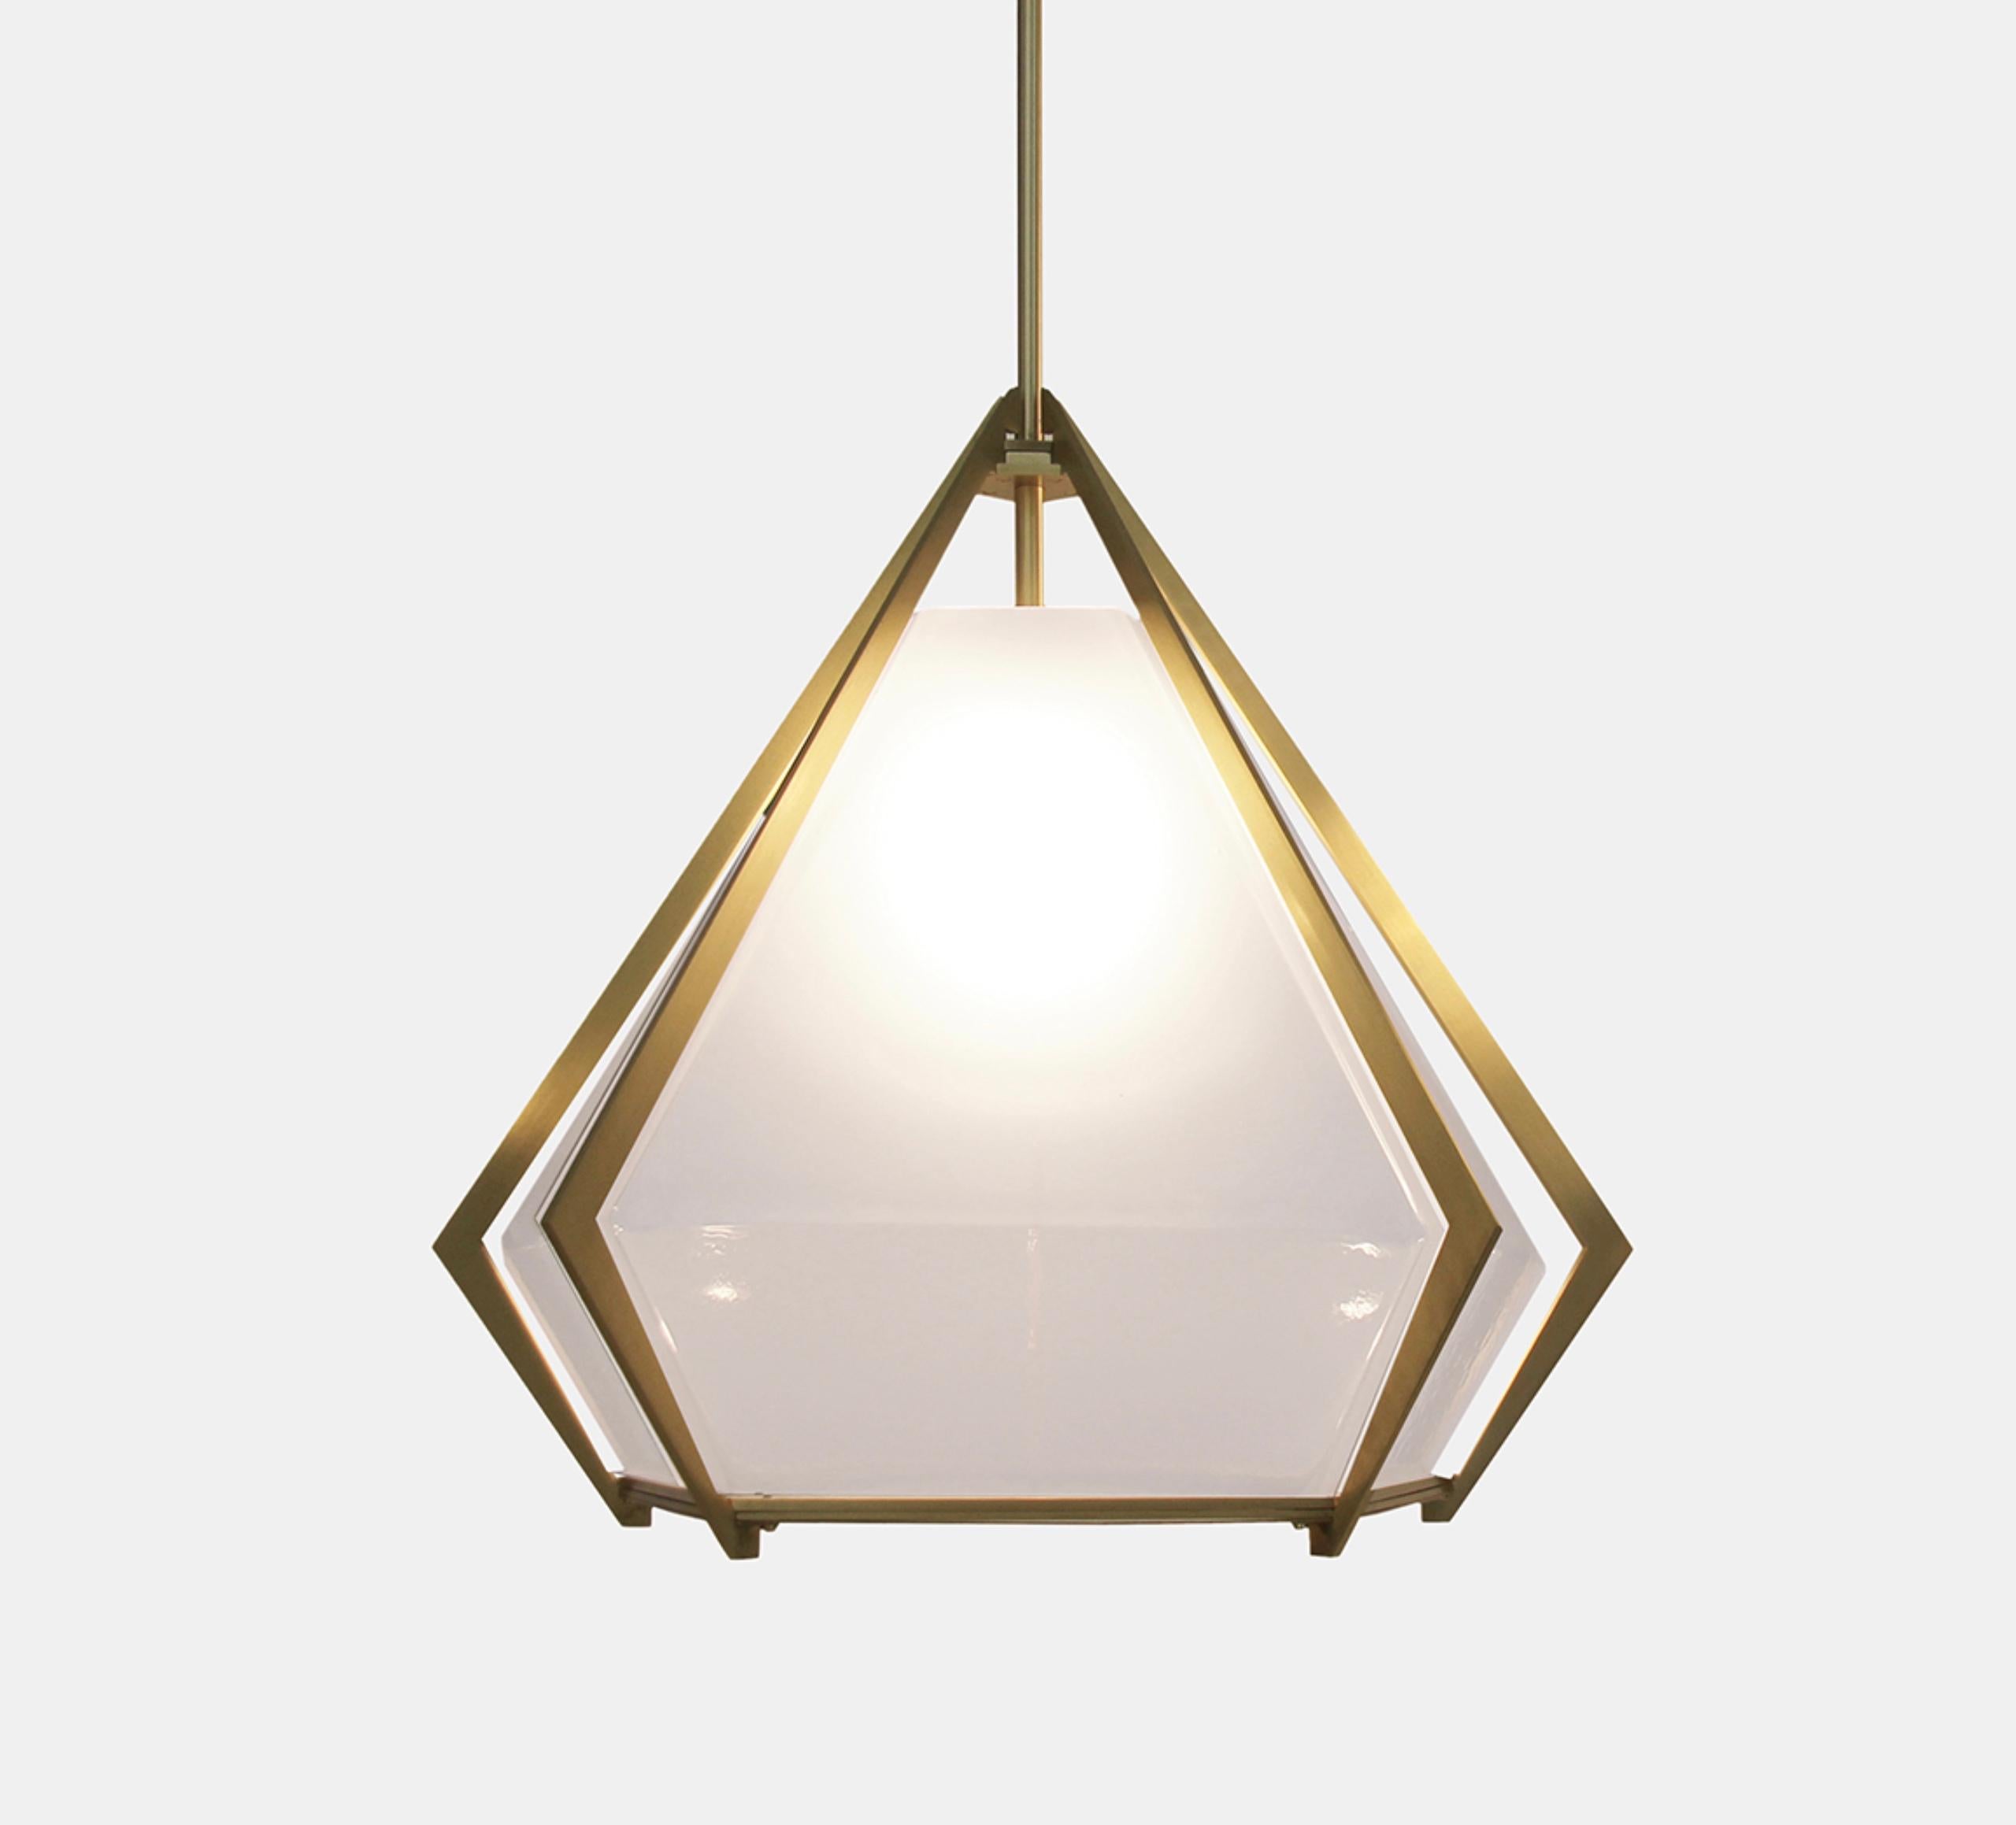 The Harlow Small Pendant offers an elegant starburst of light that reflects and refracts through its mold-blown glass shade. A sparkling prism, the Harlow Small Pendant is directly inspired by the world of jewelry with its metallic frame encasing a